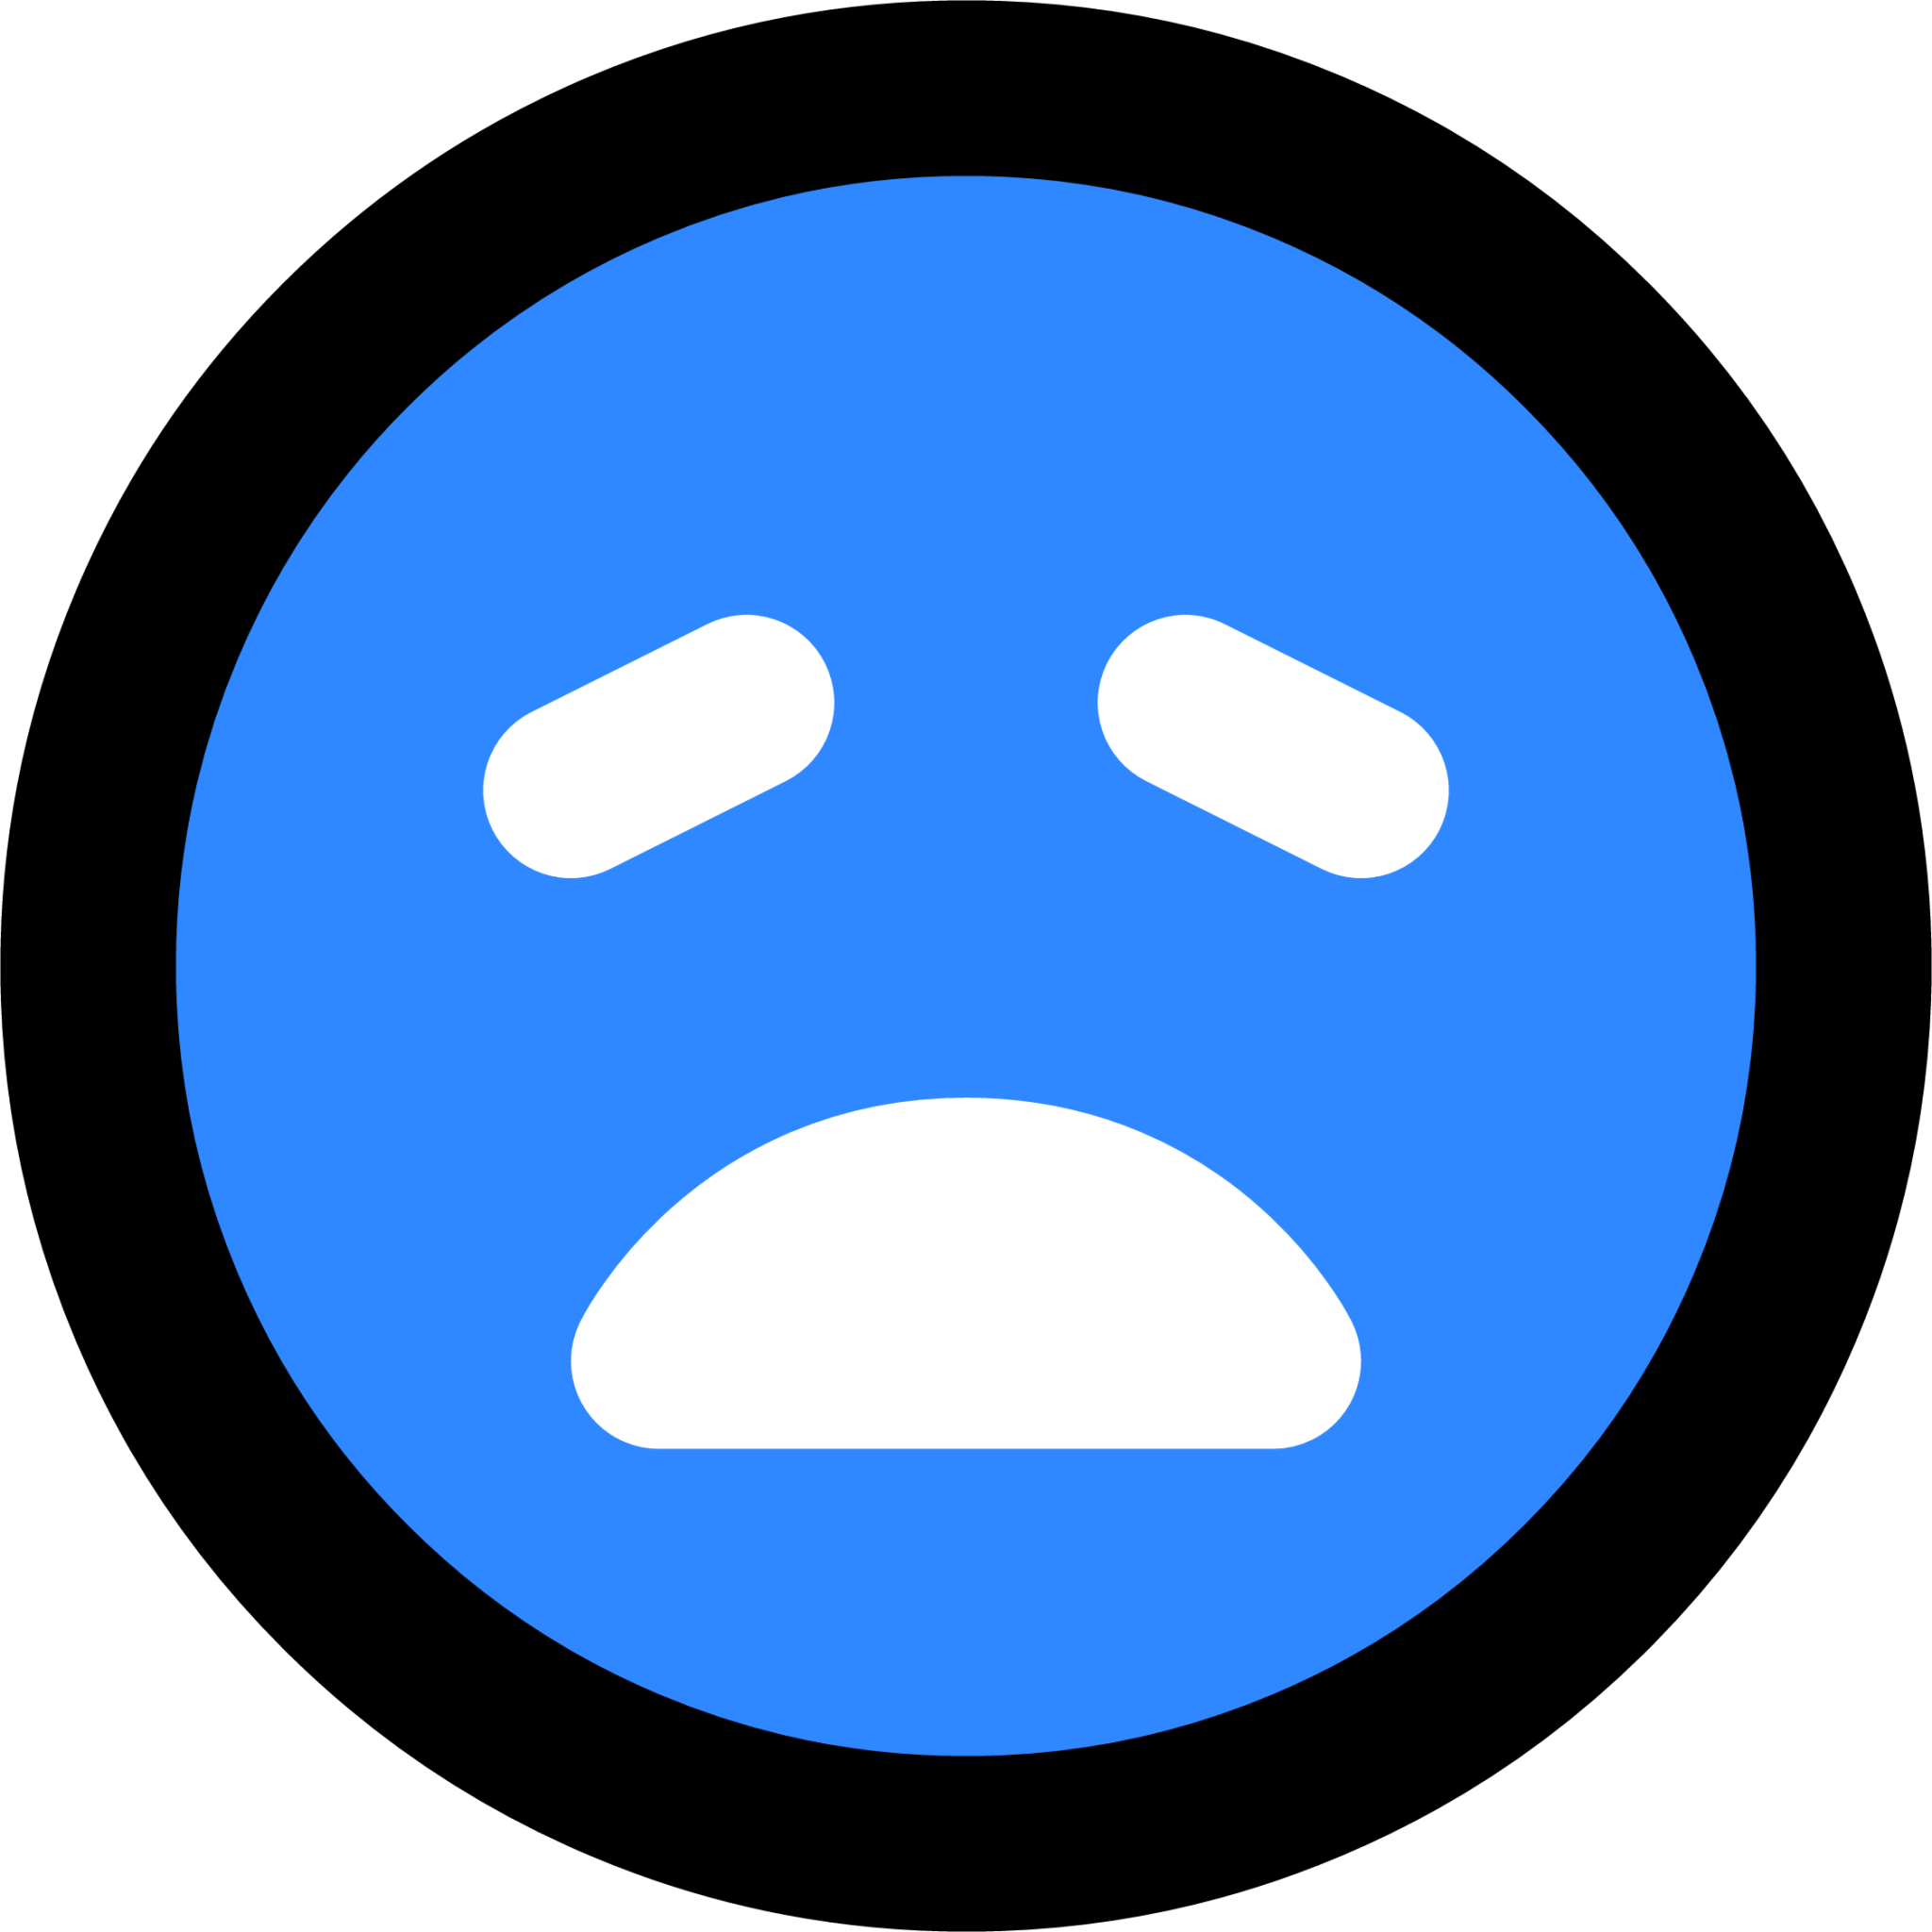 weary face icon